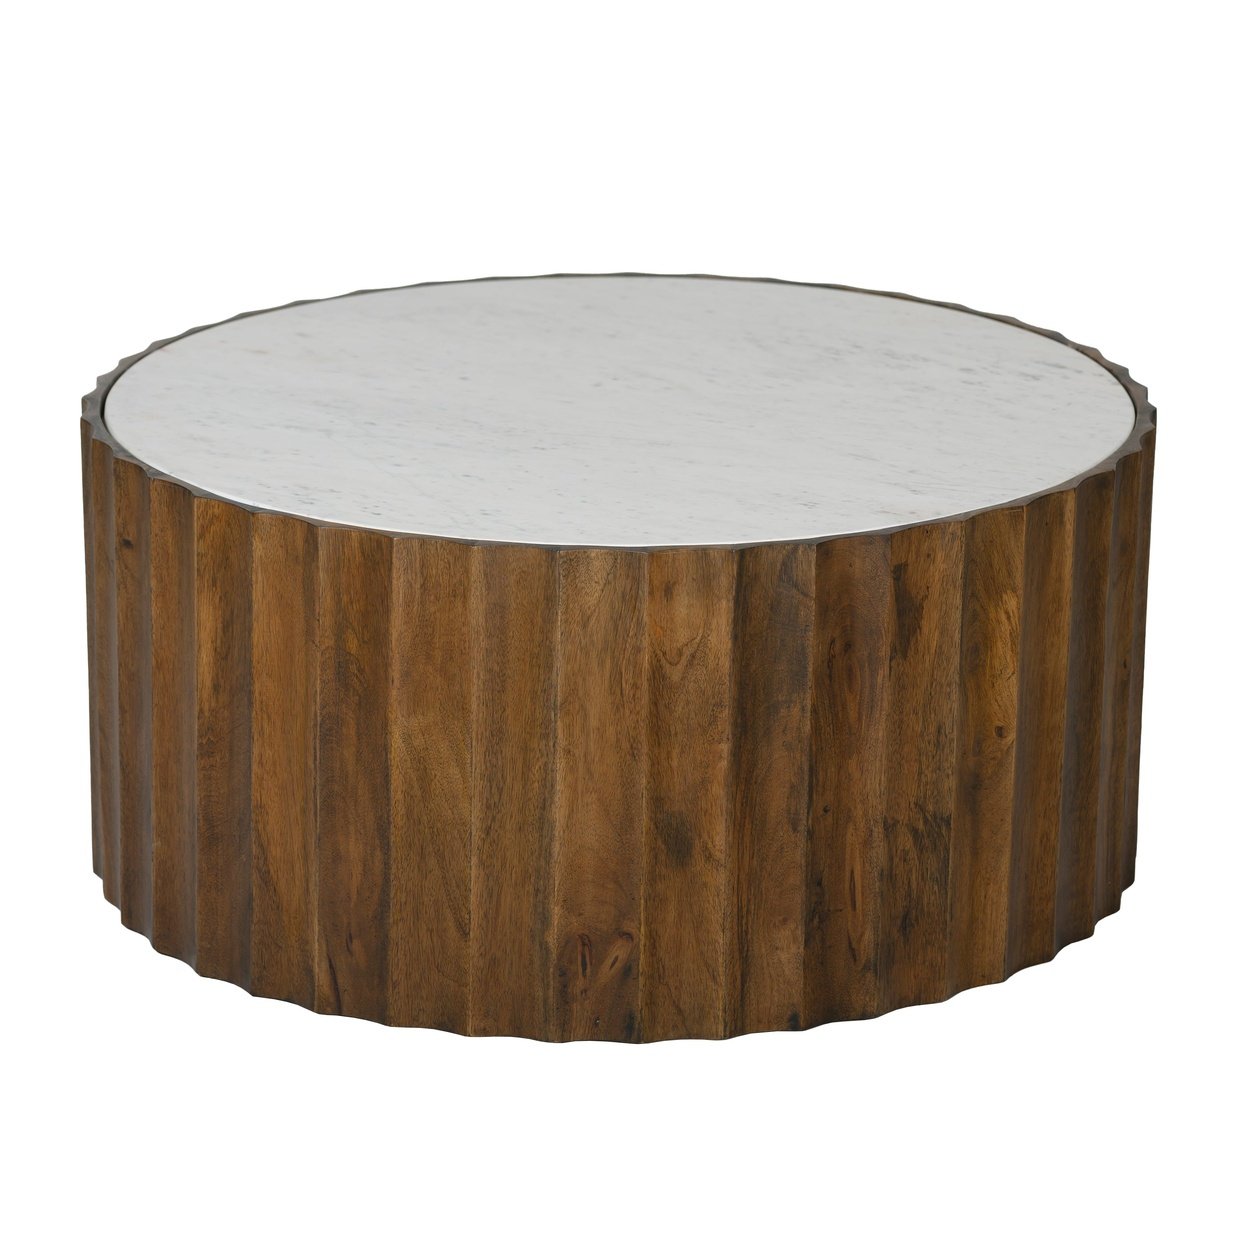 ROUND MARBLE TOP COCKTAIL TABLE